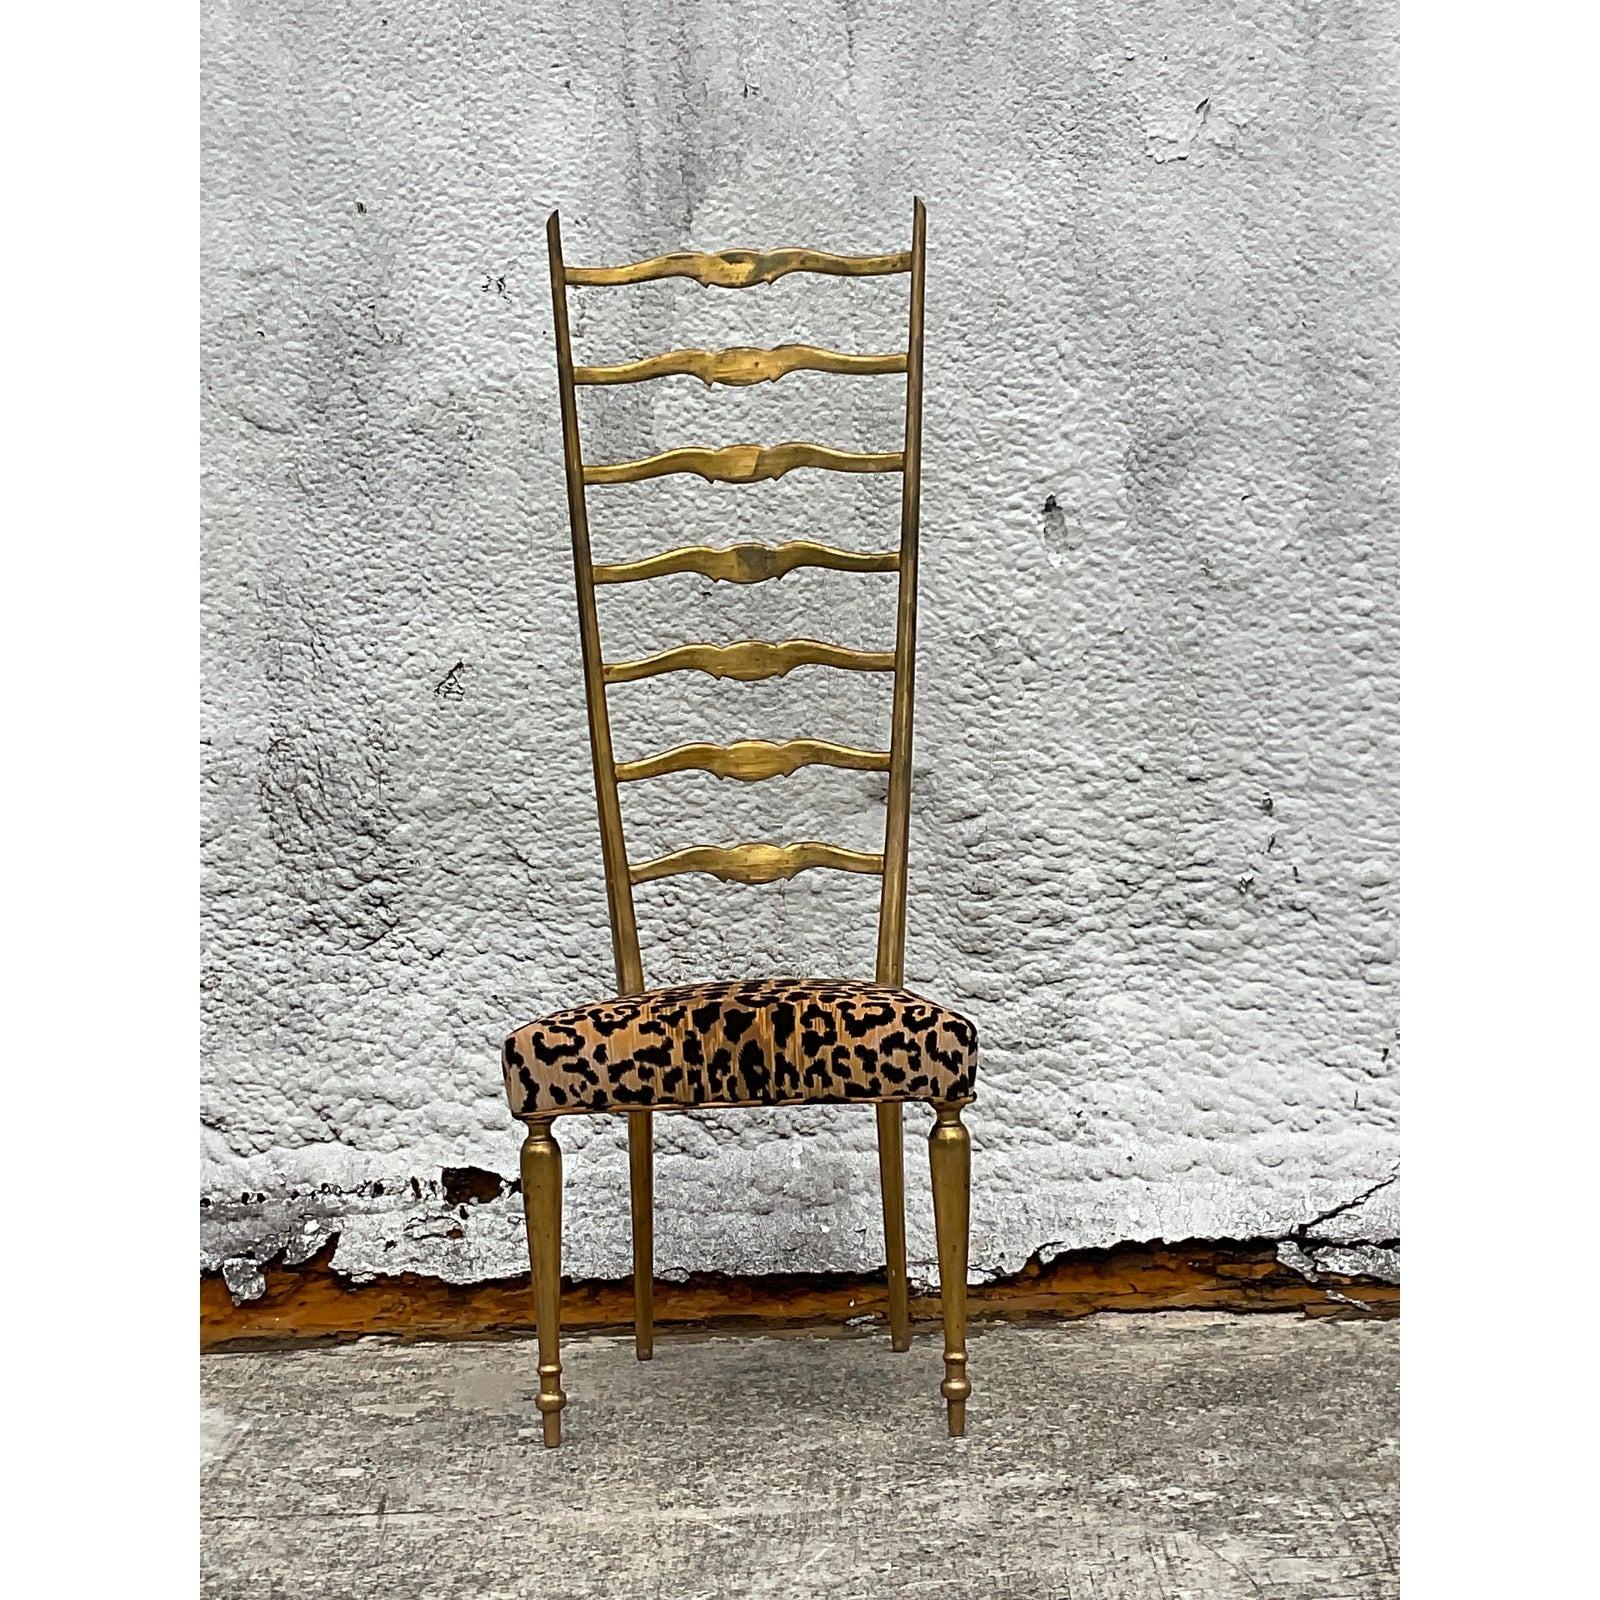 A fabulous vintage Boho Ladderback chair. Done in the style of Gio Ponti. Fully reupholstered in a leopard velvet. Acquired from a Palm Beach estate.